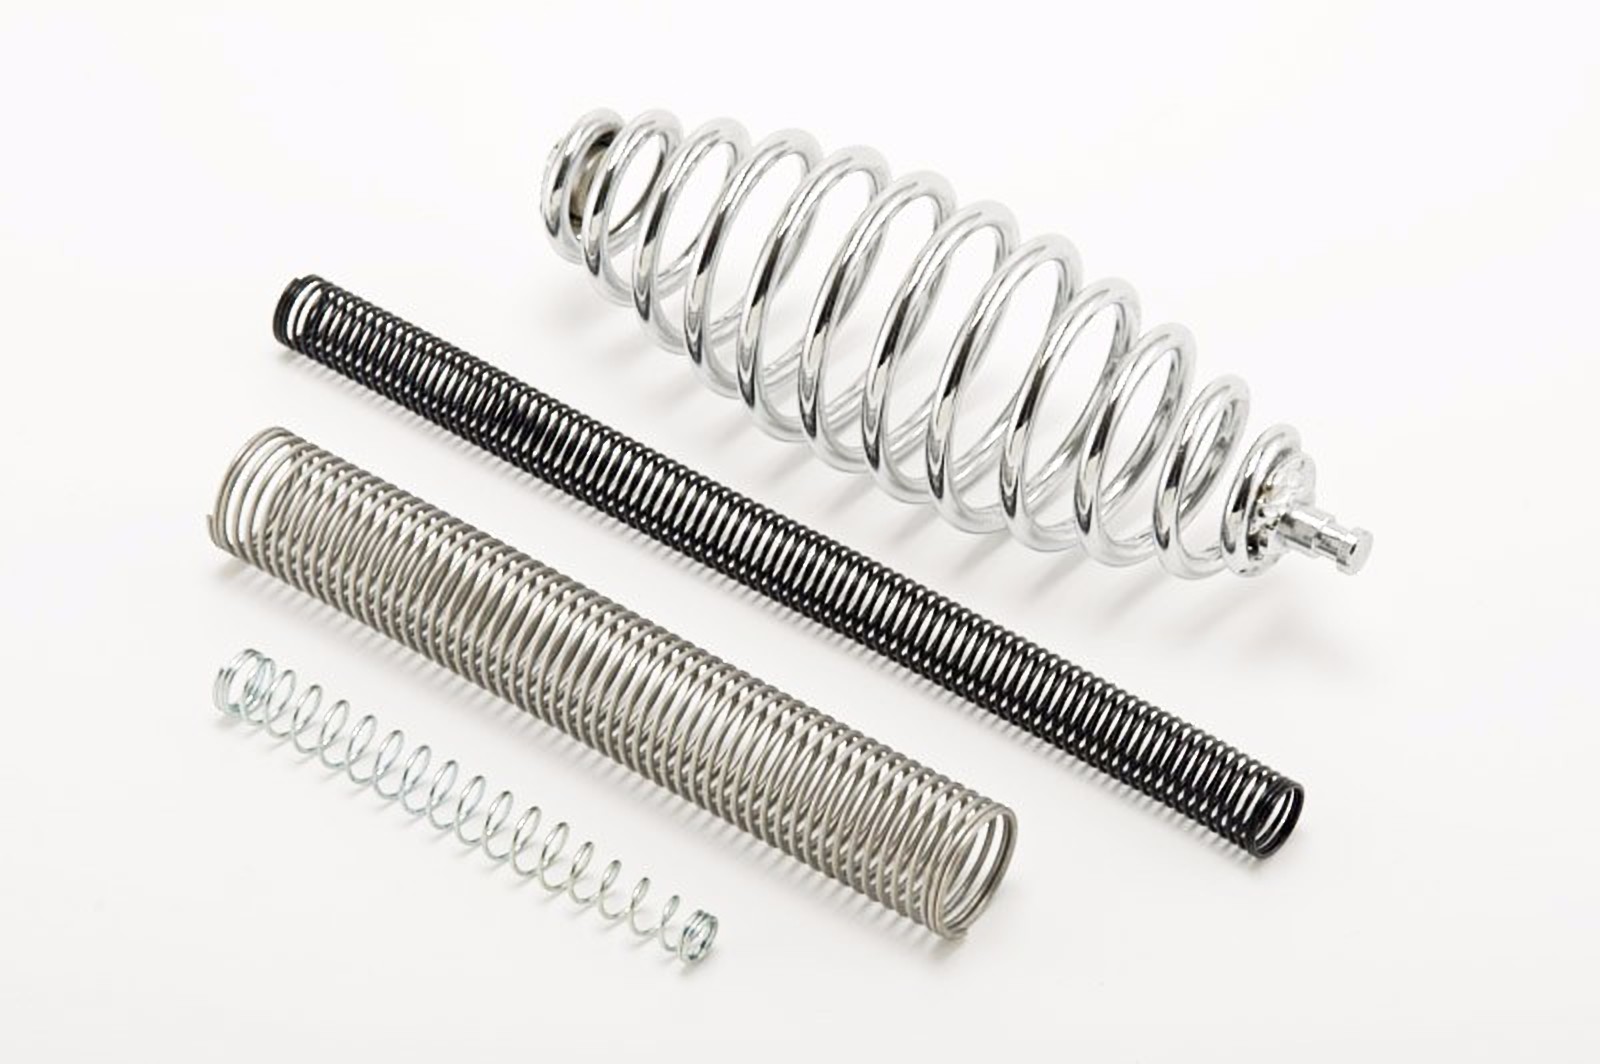 COMPRESSION SPRING – CHEE YEAH SPRING